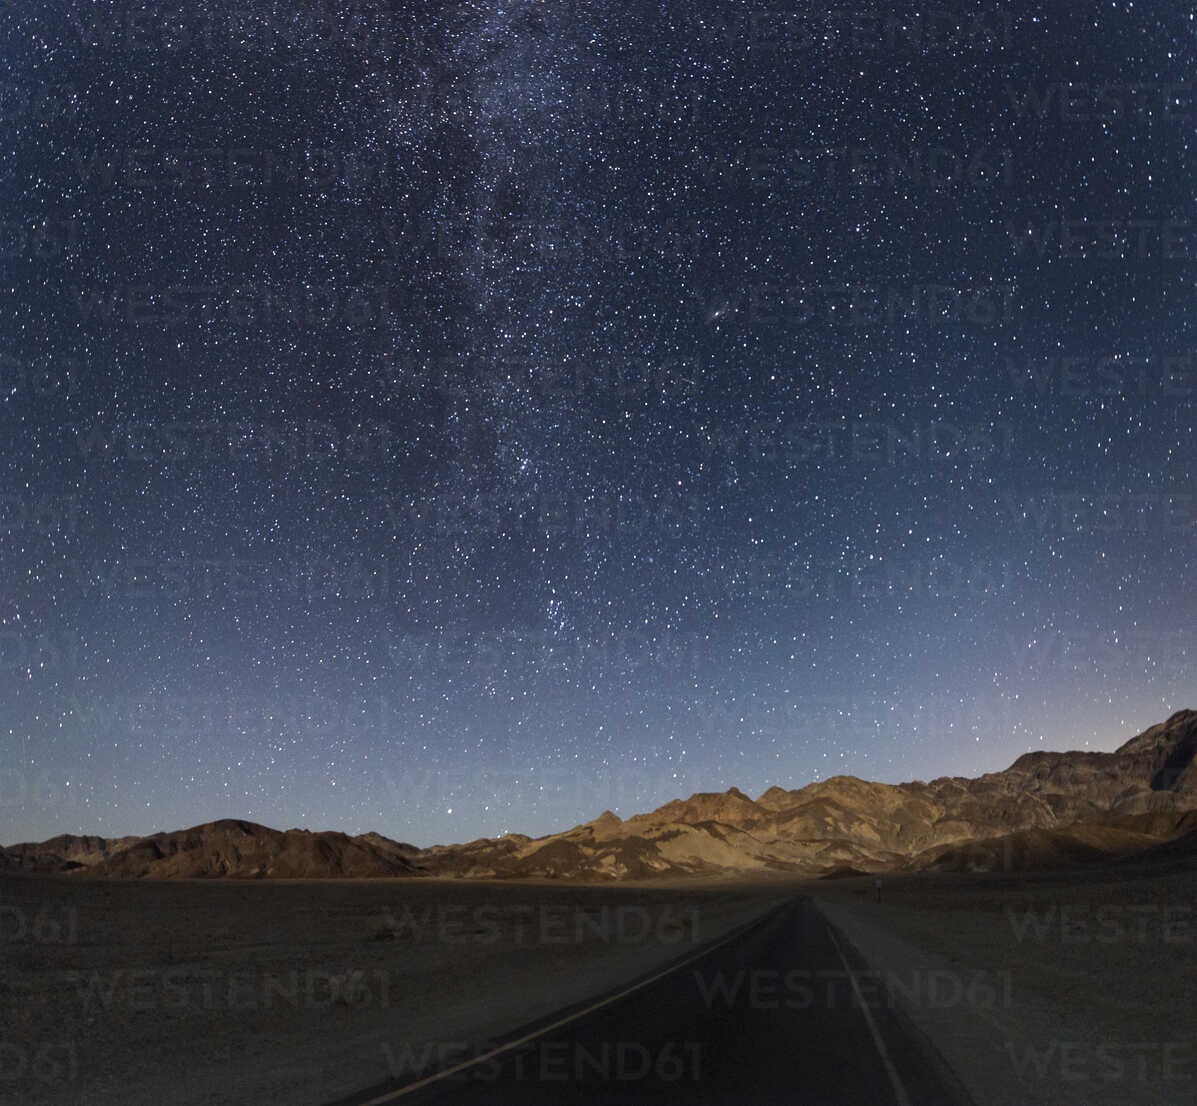 Usa California Death Valley Night Shot With Stars And Milky Way Over